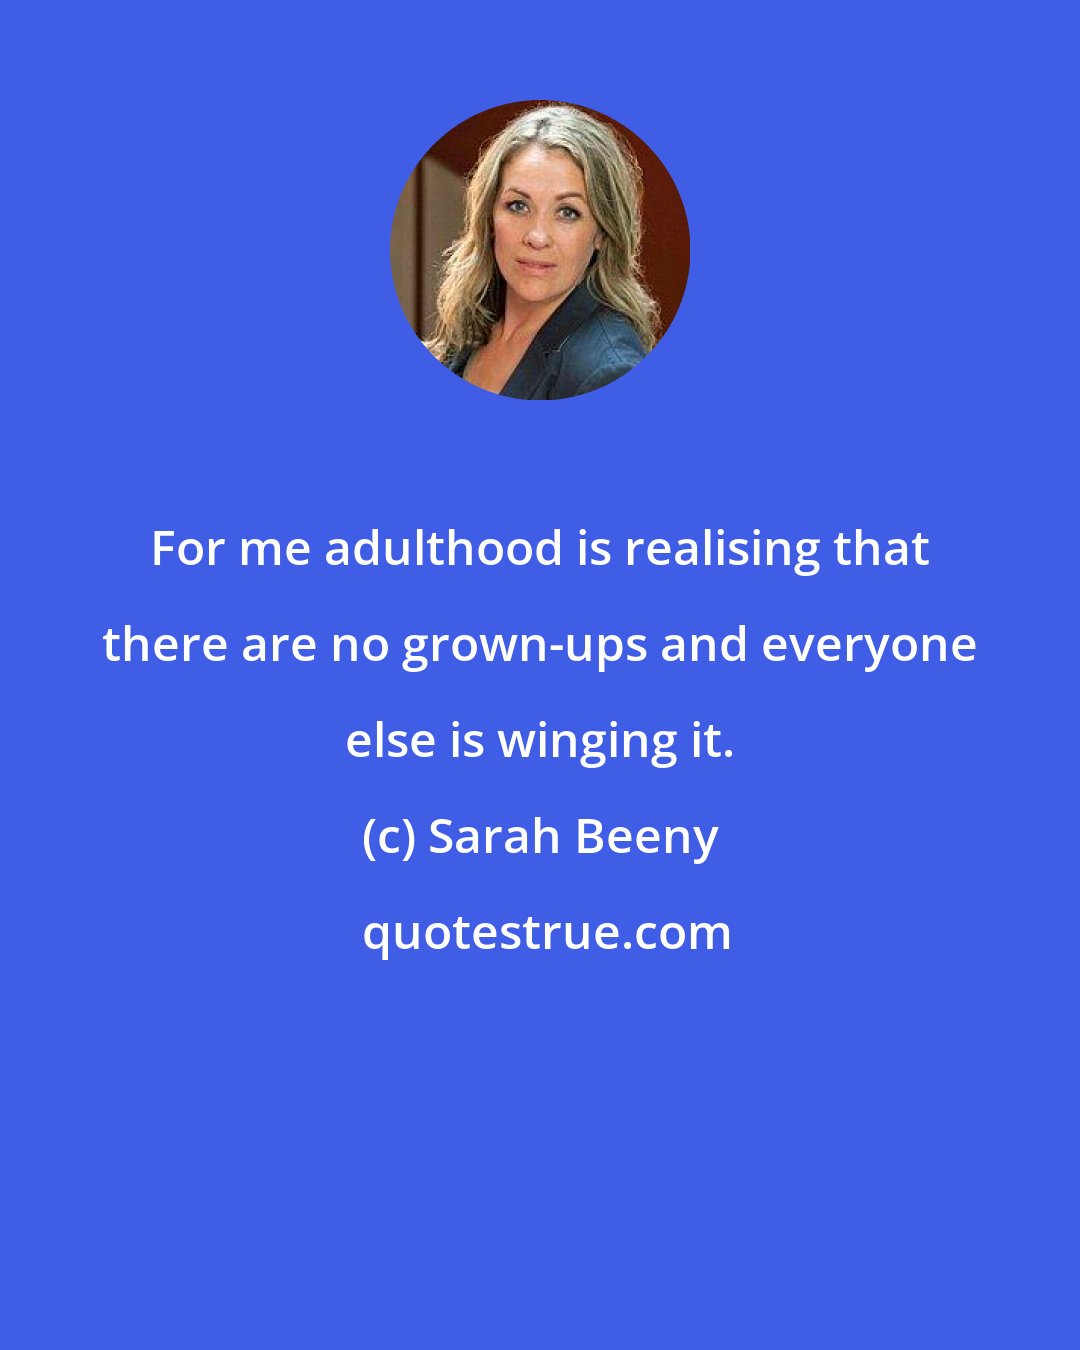 Sarah Beeny: For me adulthood is realising that there are no grown-ups and everyone else is winging it.